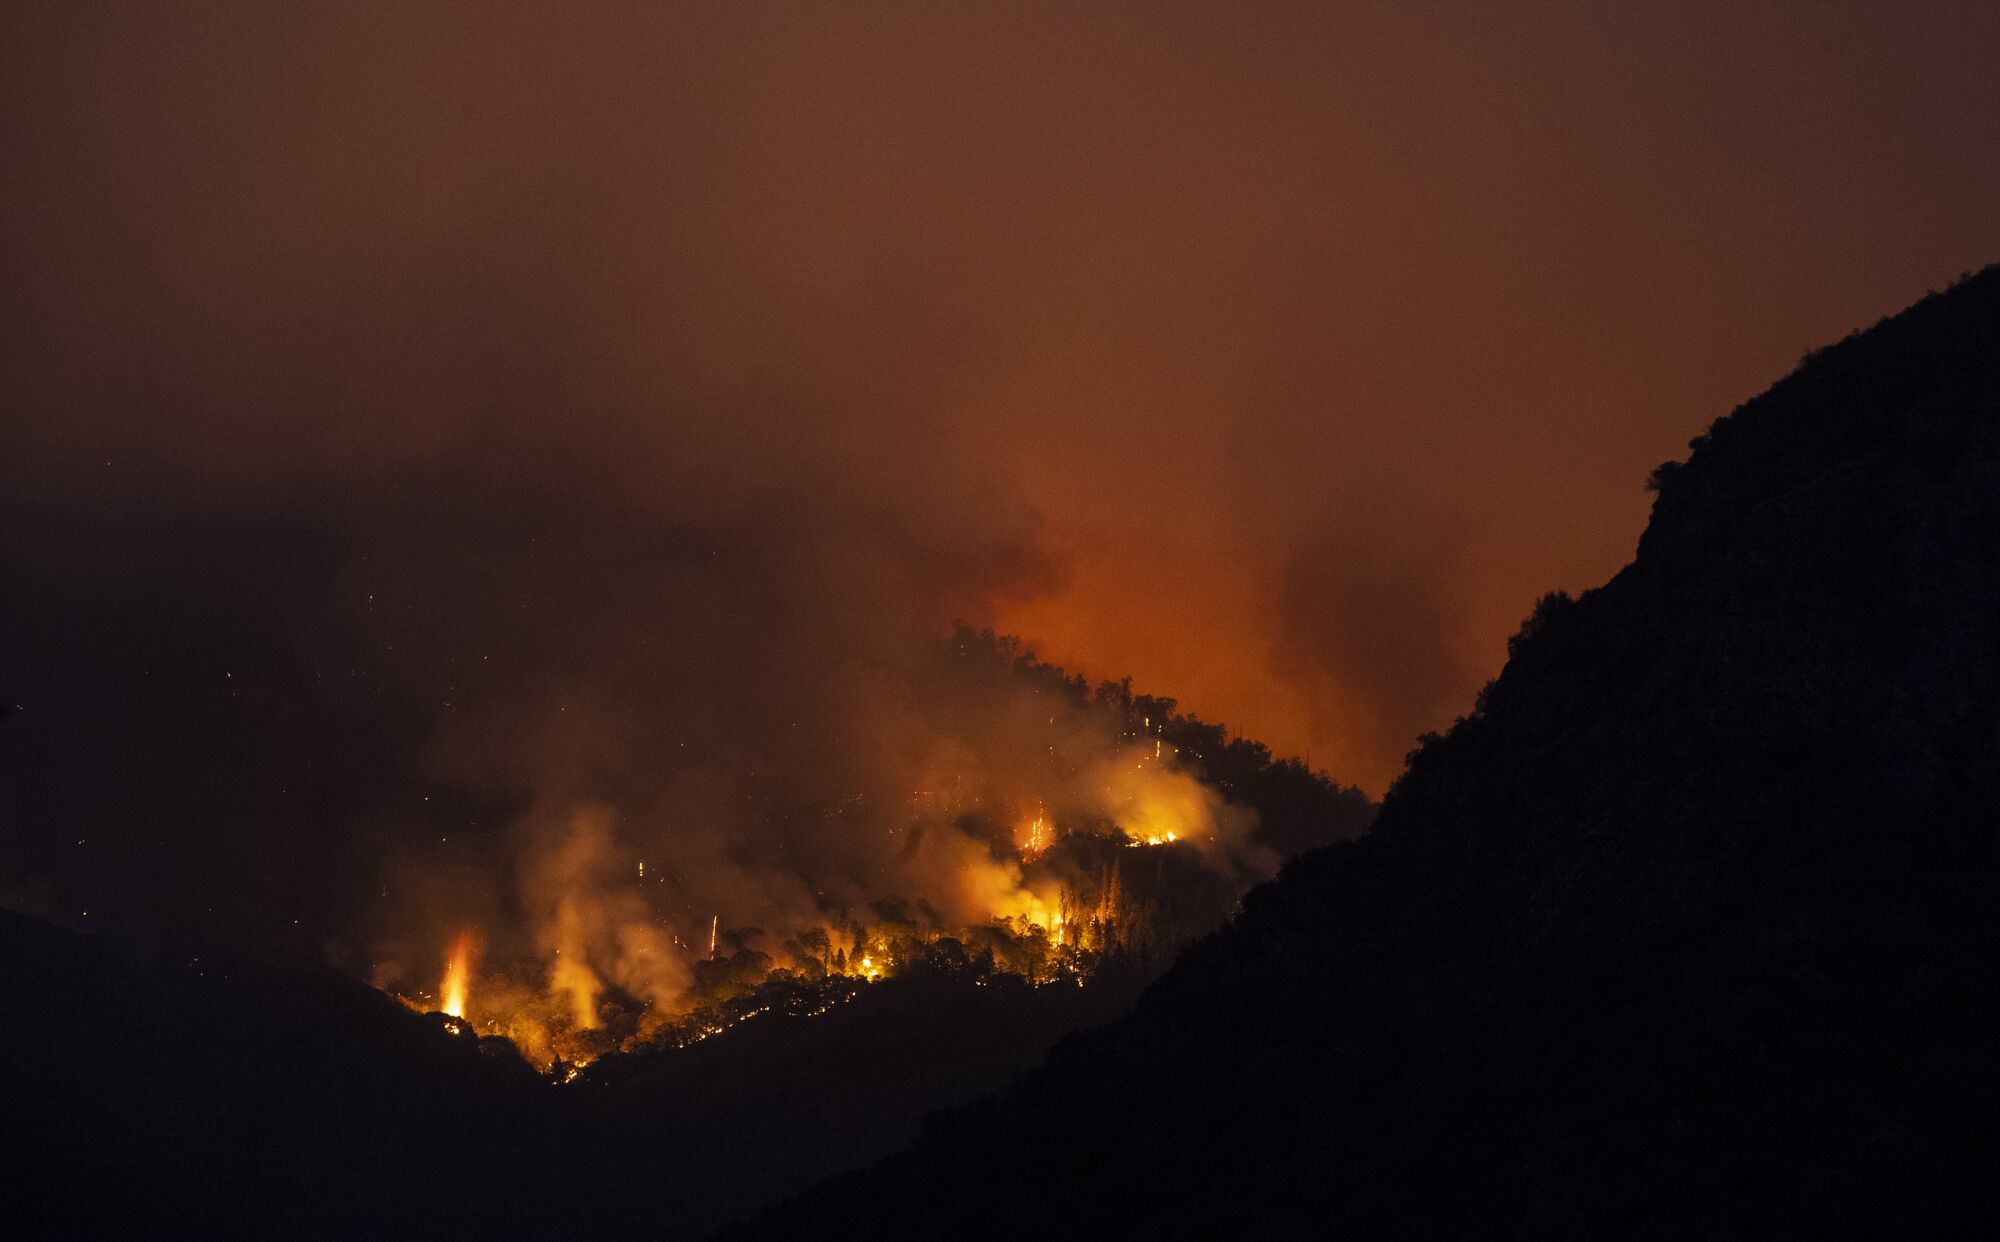 Flames glow on a forested hillside at night